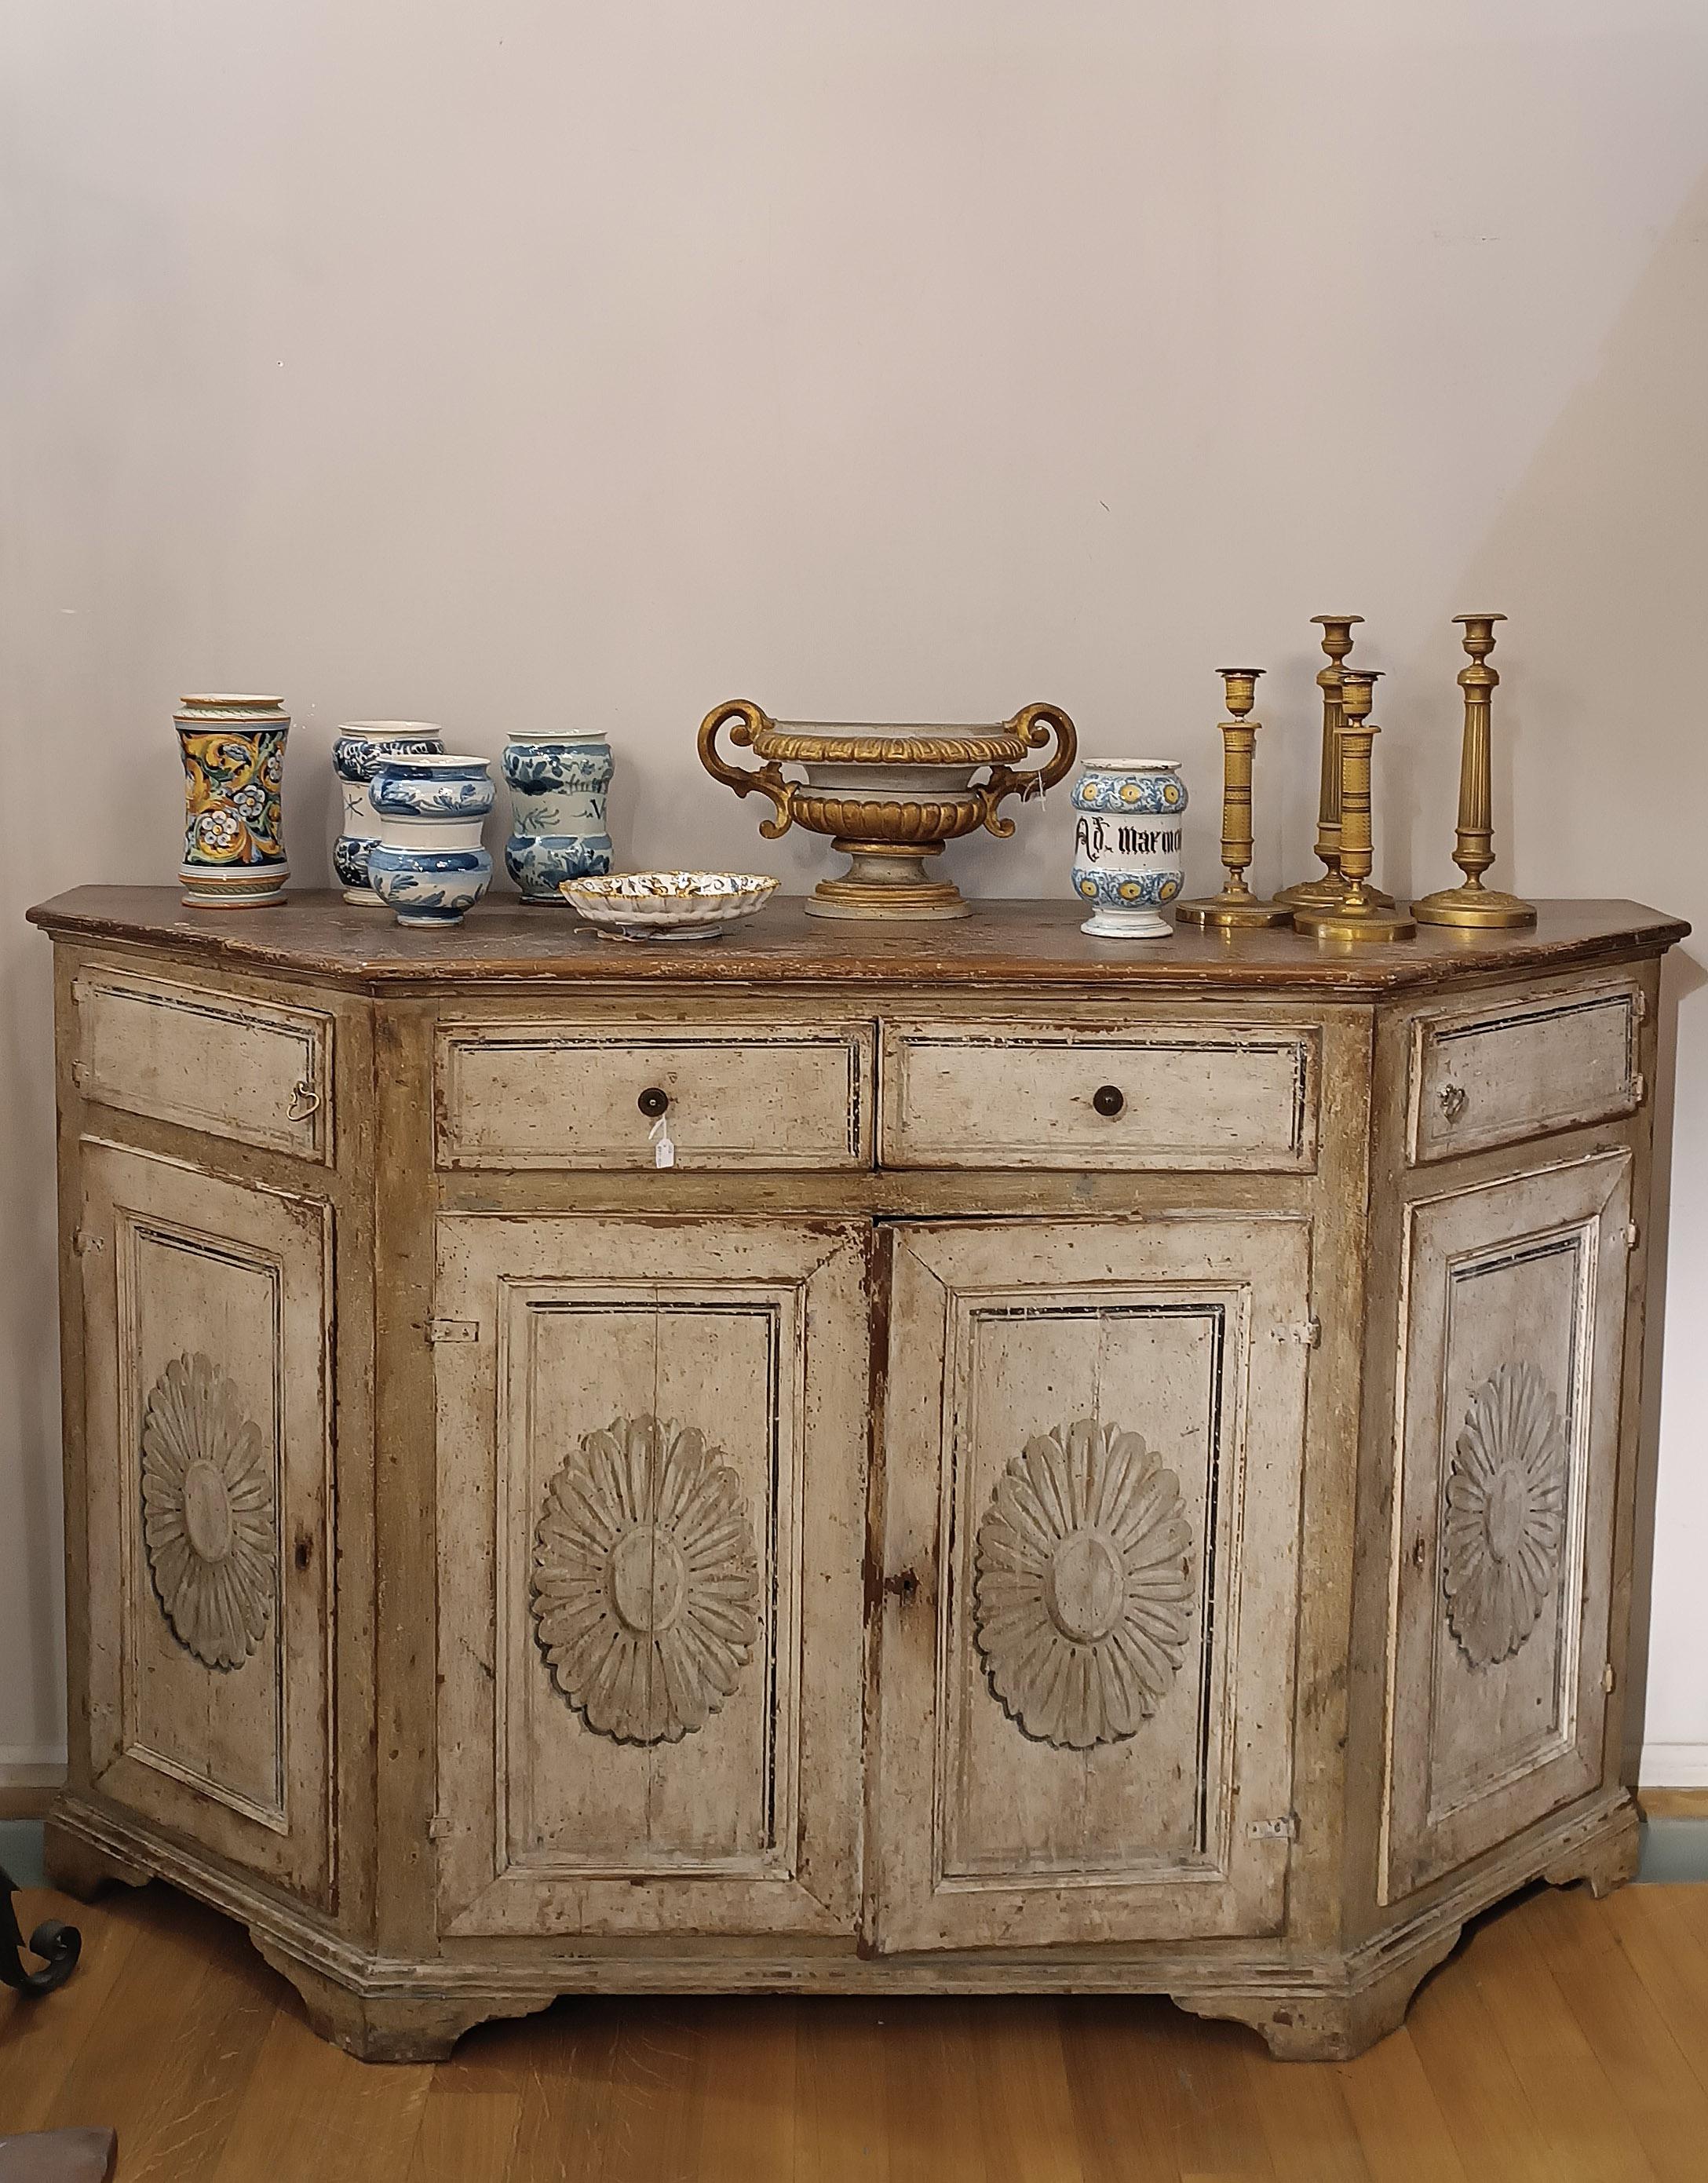 END OF THE 18th CENTURY NEOCLASSICAL SIDEBOARD IN PAINTED WALNUT 2